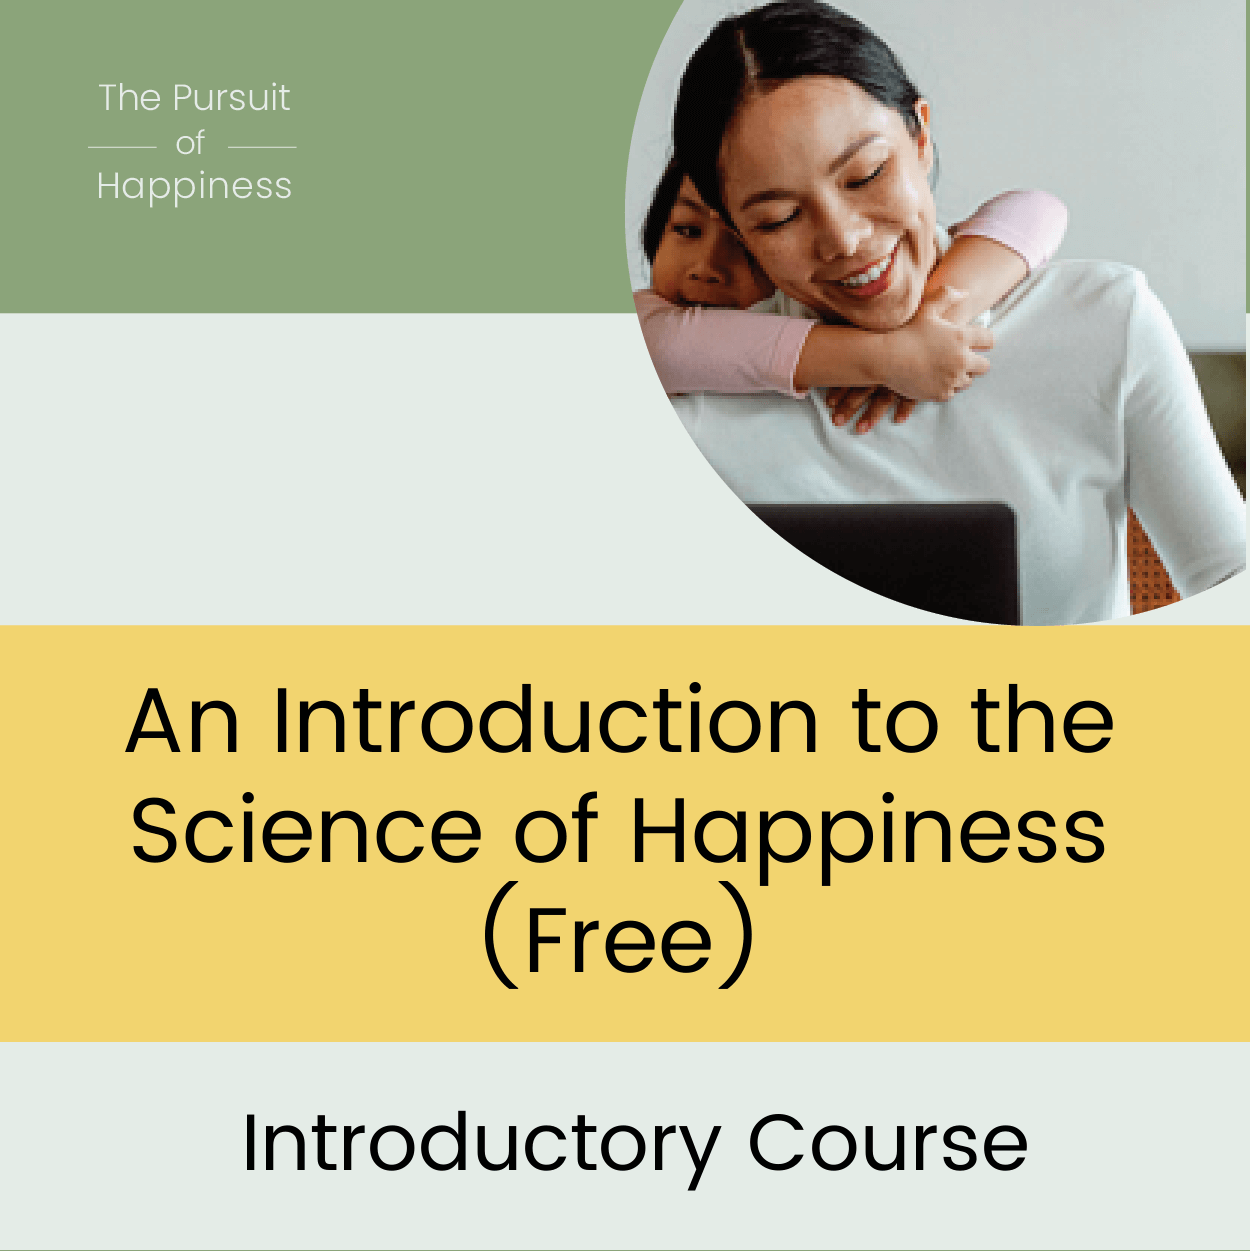 Intro to Science of Happiness Course